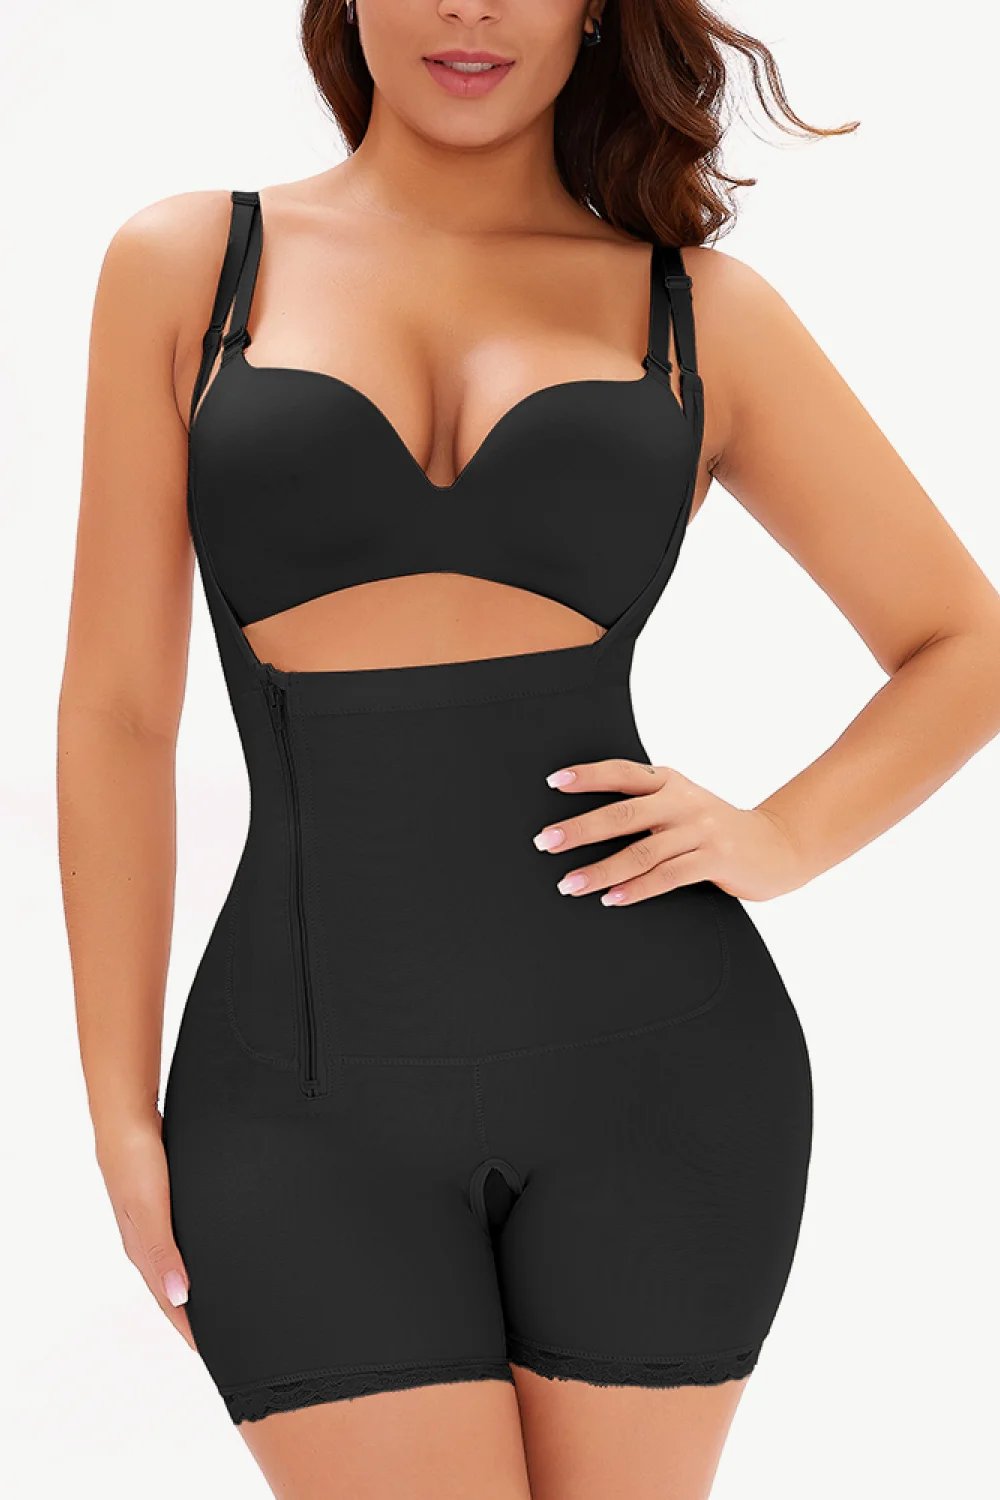 Confidently shape your waist with a premium compression faja.